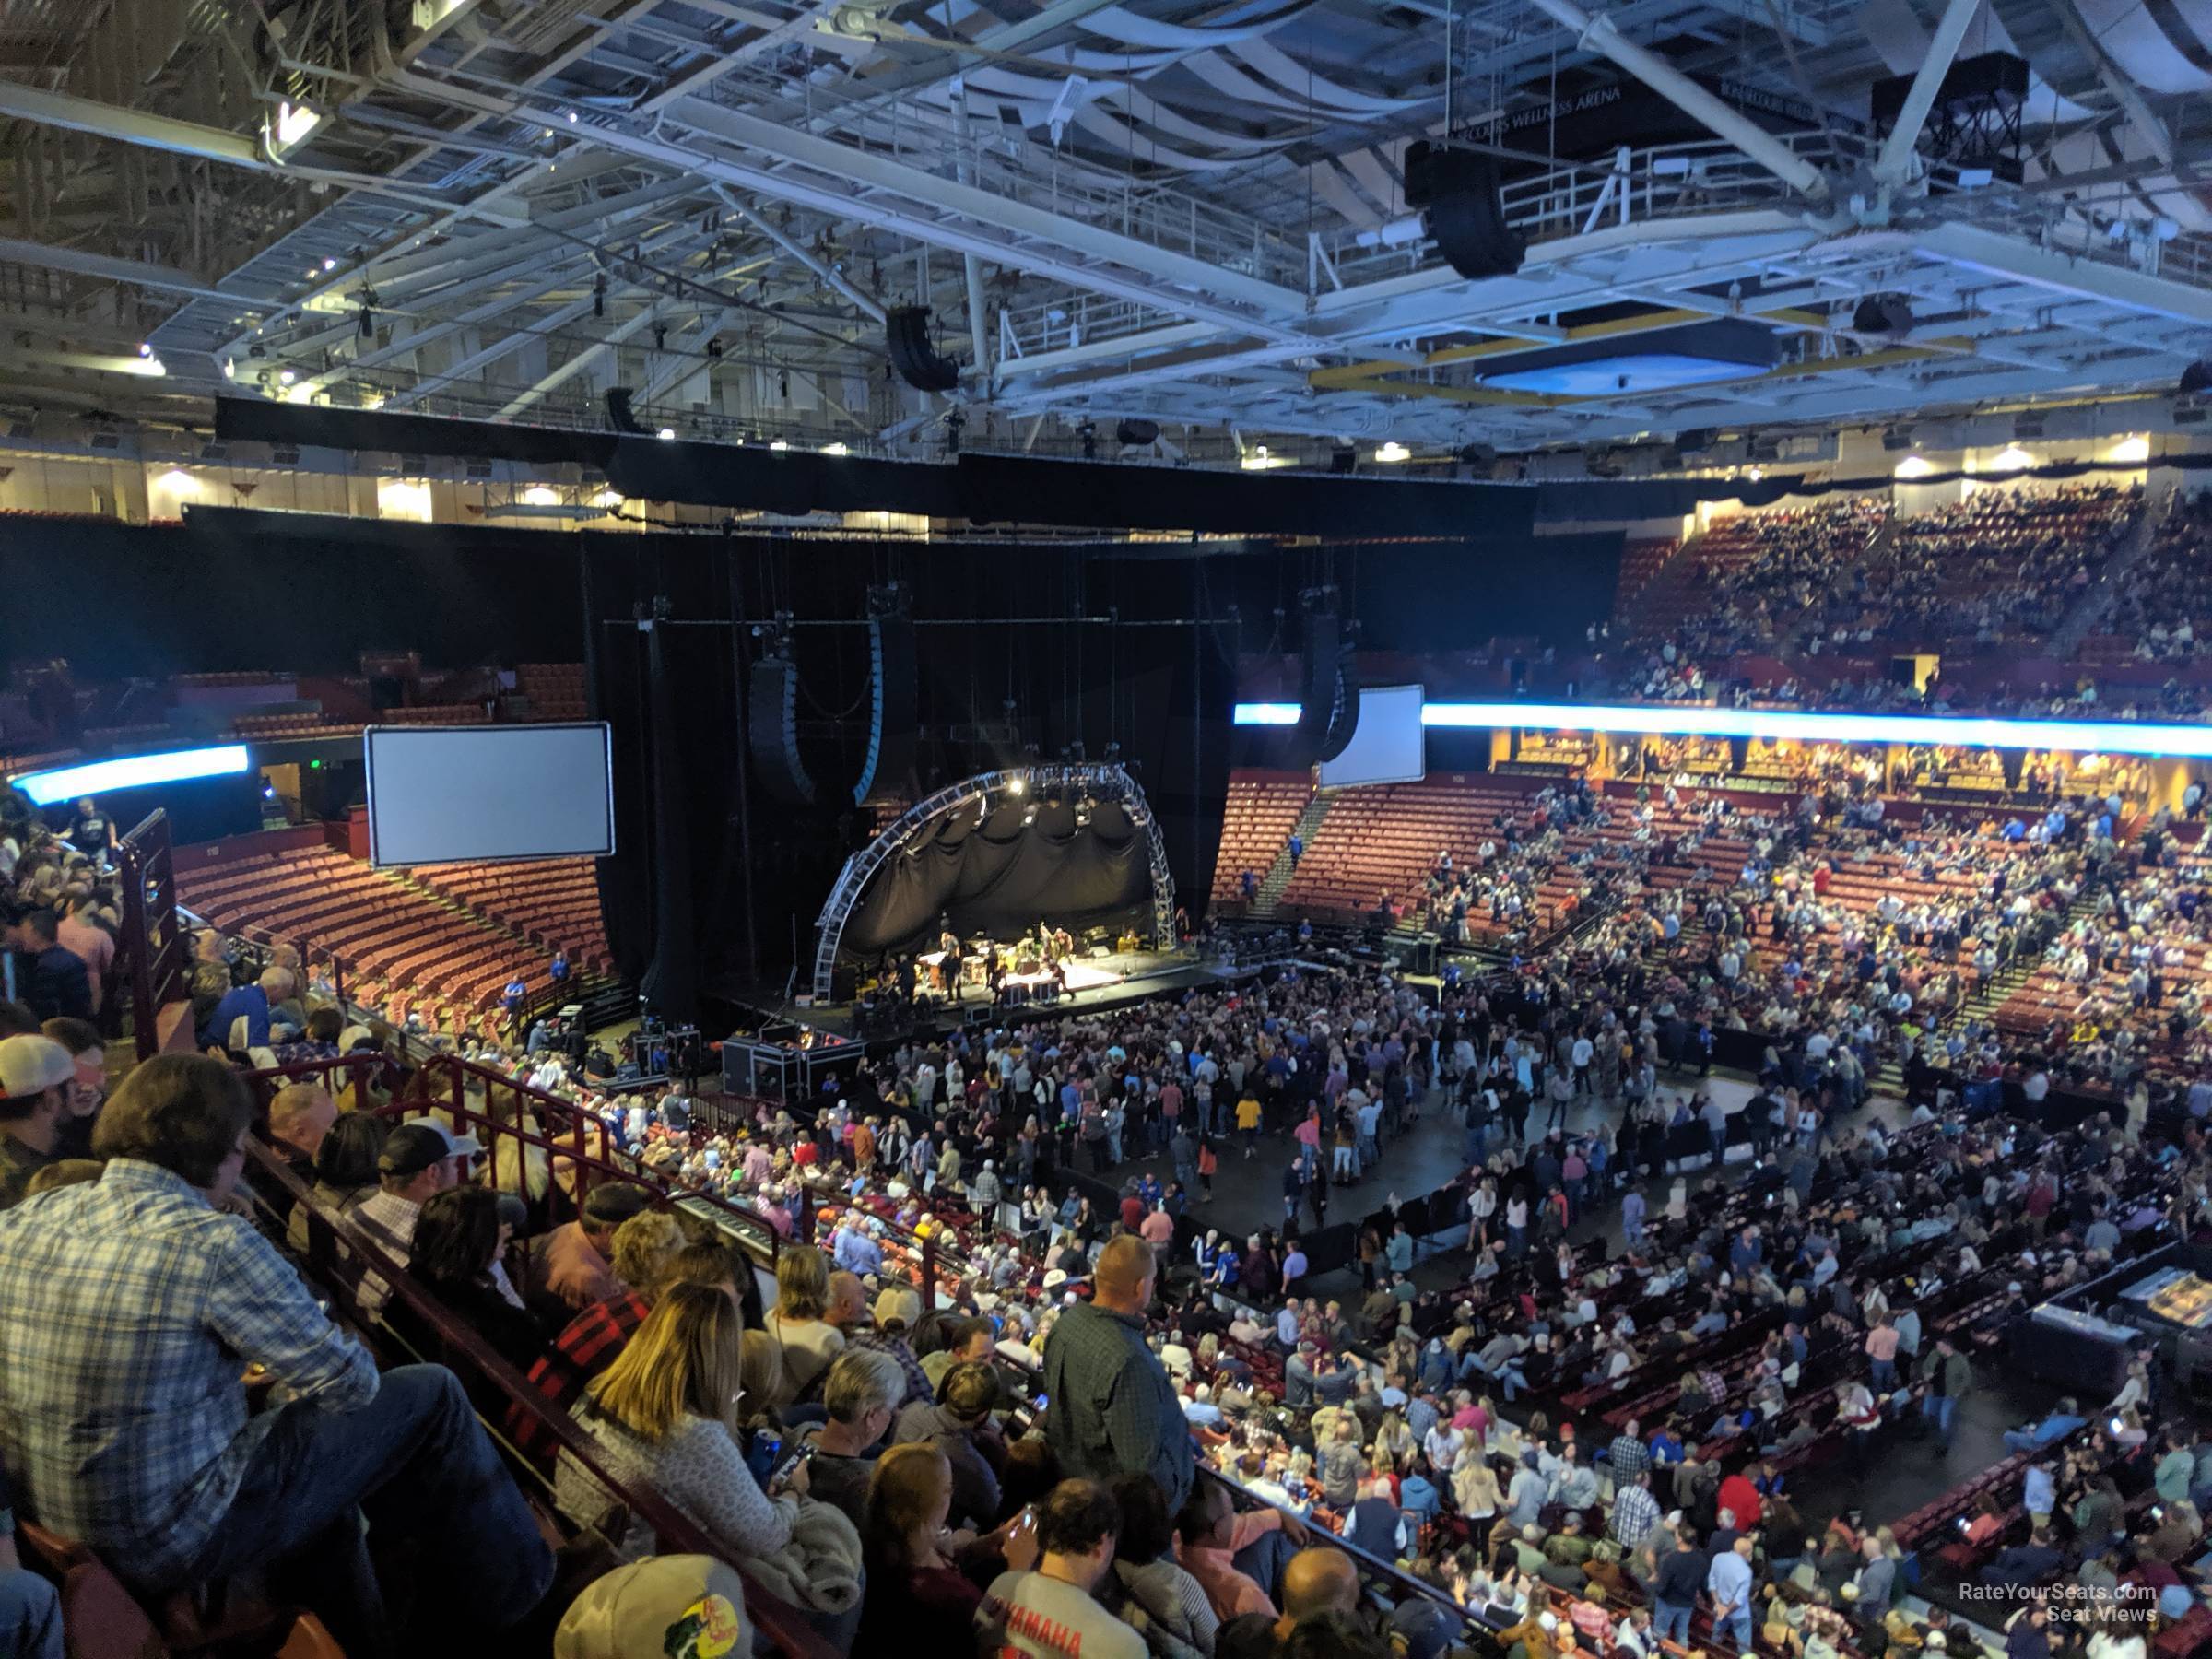 Section 223 at Bon Secours Wellness Arena for Concerts